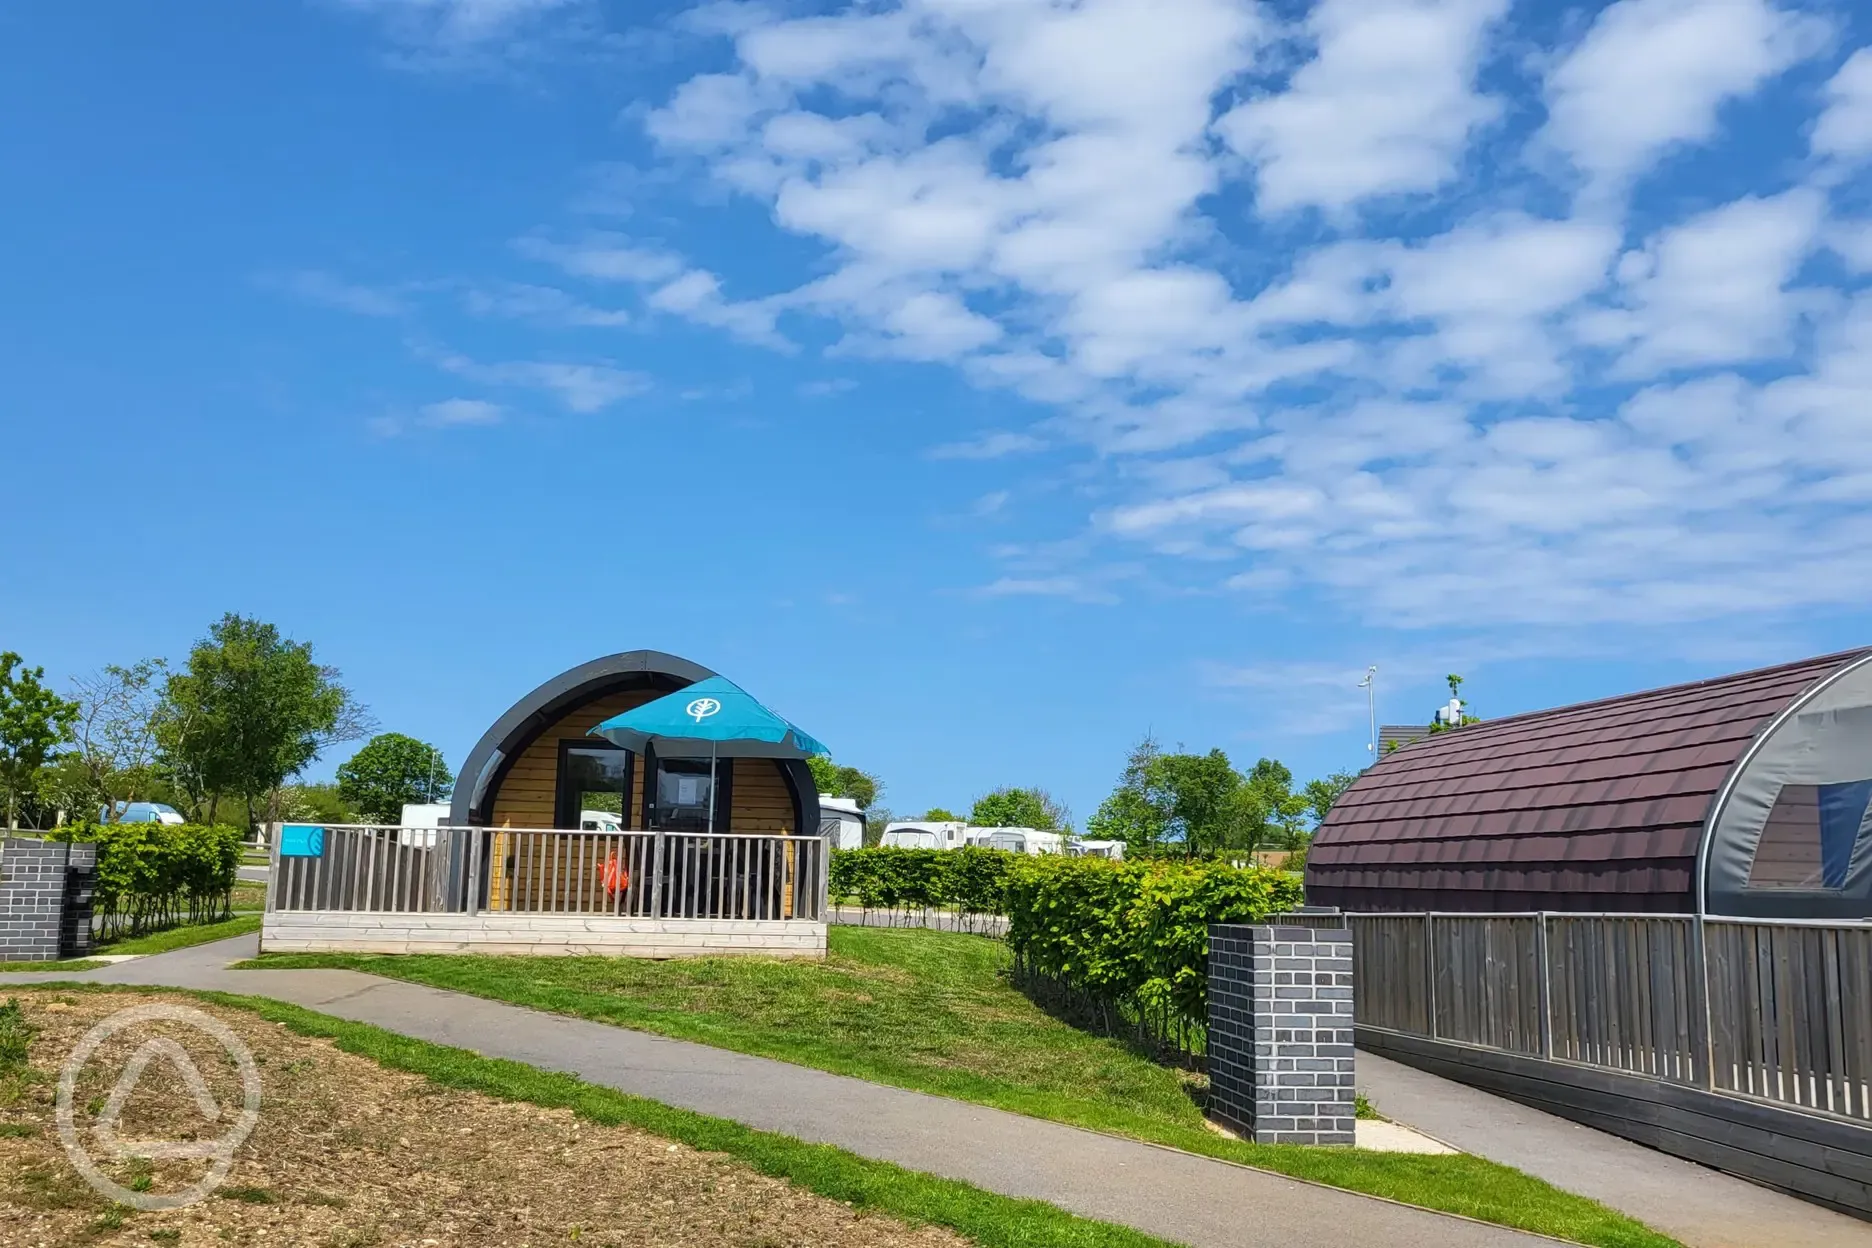 Universally accessible glamping pod and glamping cabin